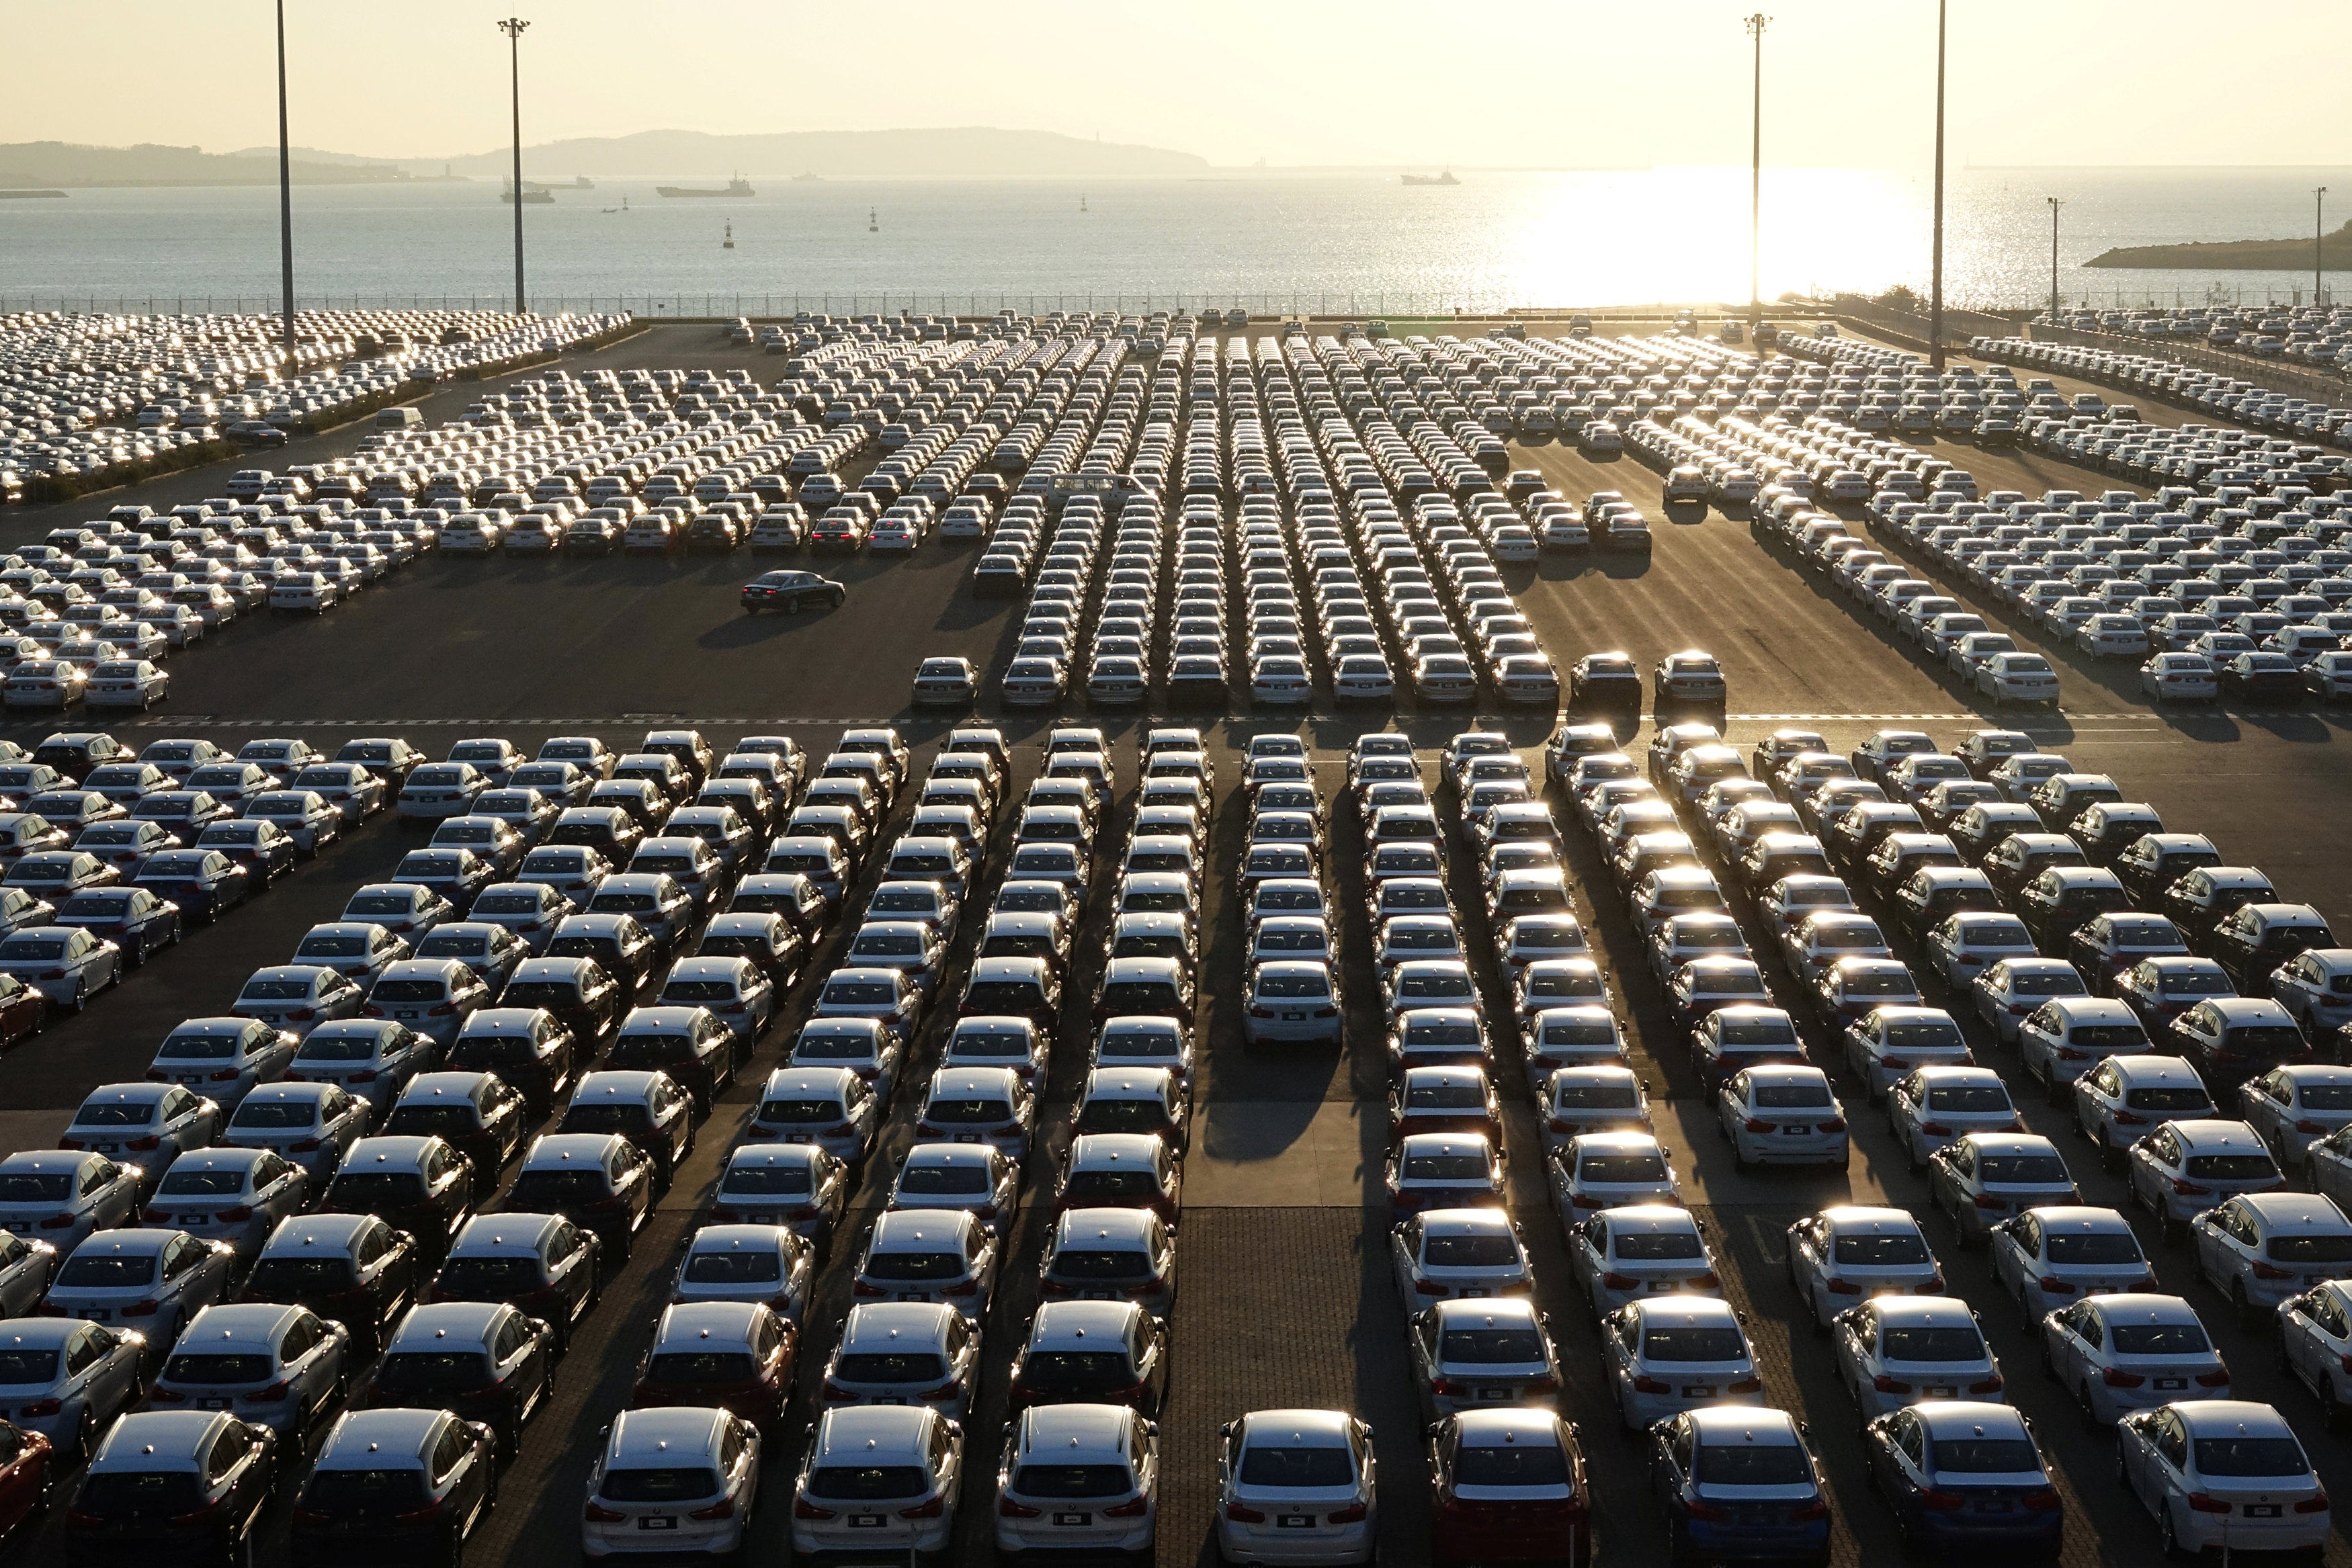 New cars are seen at the automobile terminal in the port of Dalian, Liaoning province, China on October 18, 2018. Photo: Reuters